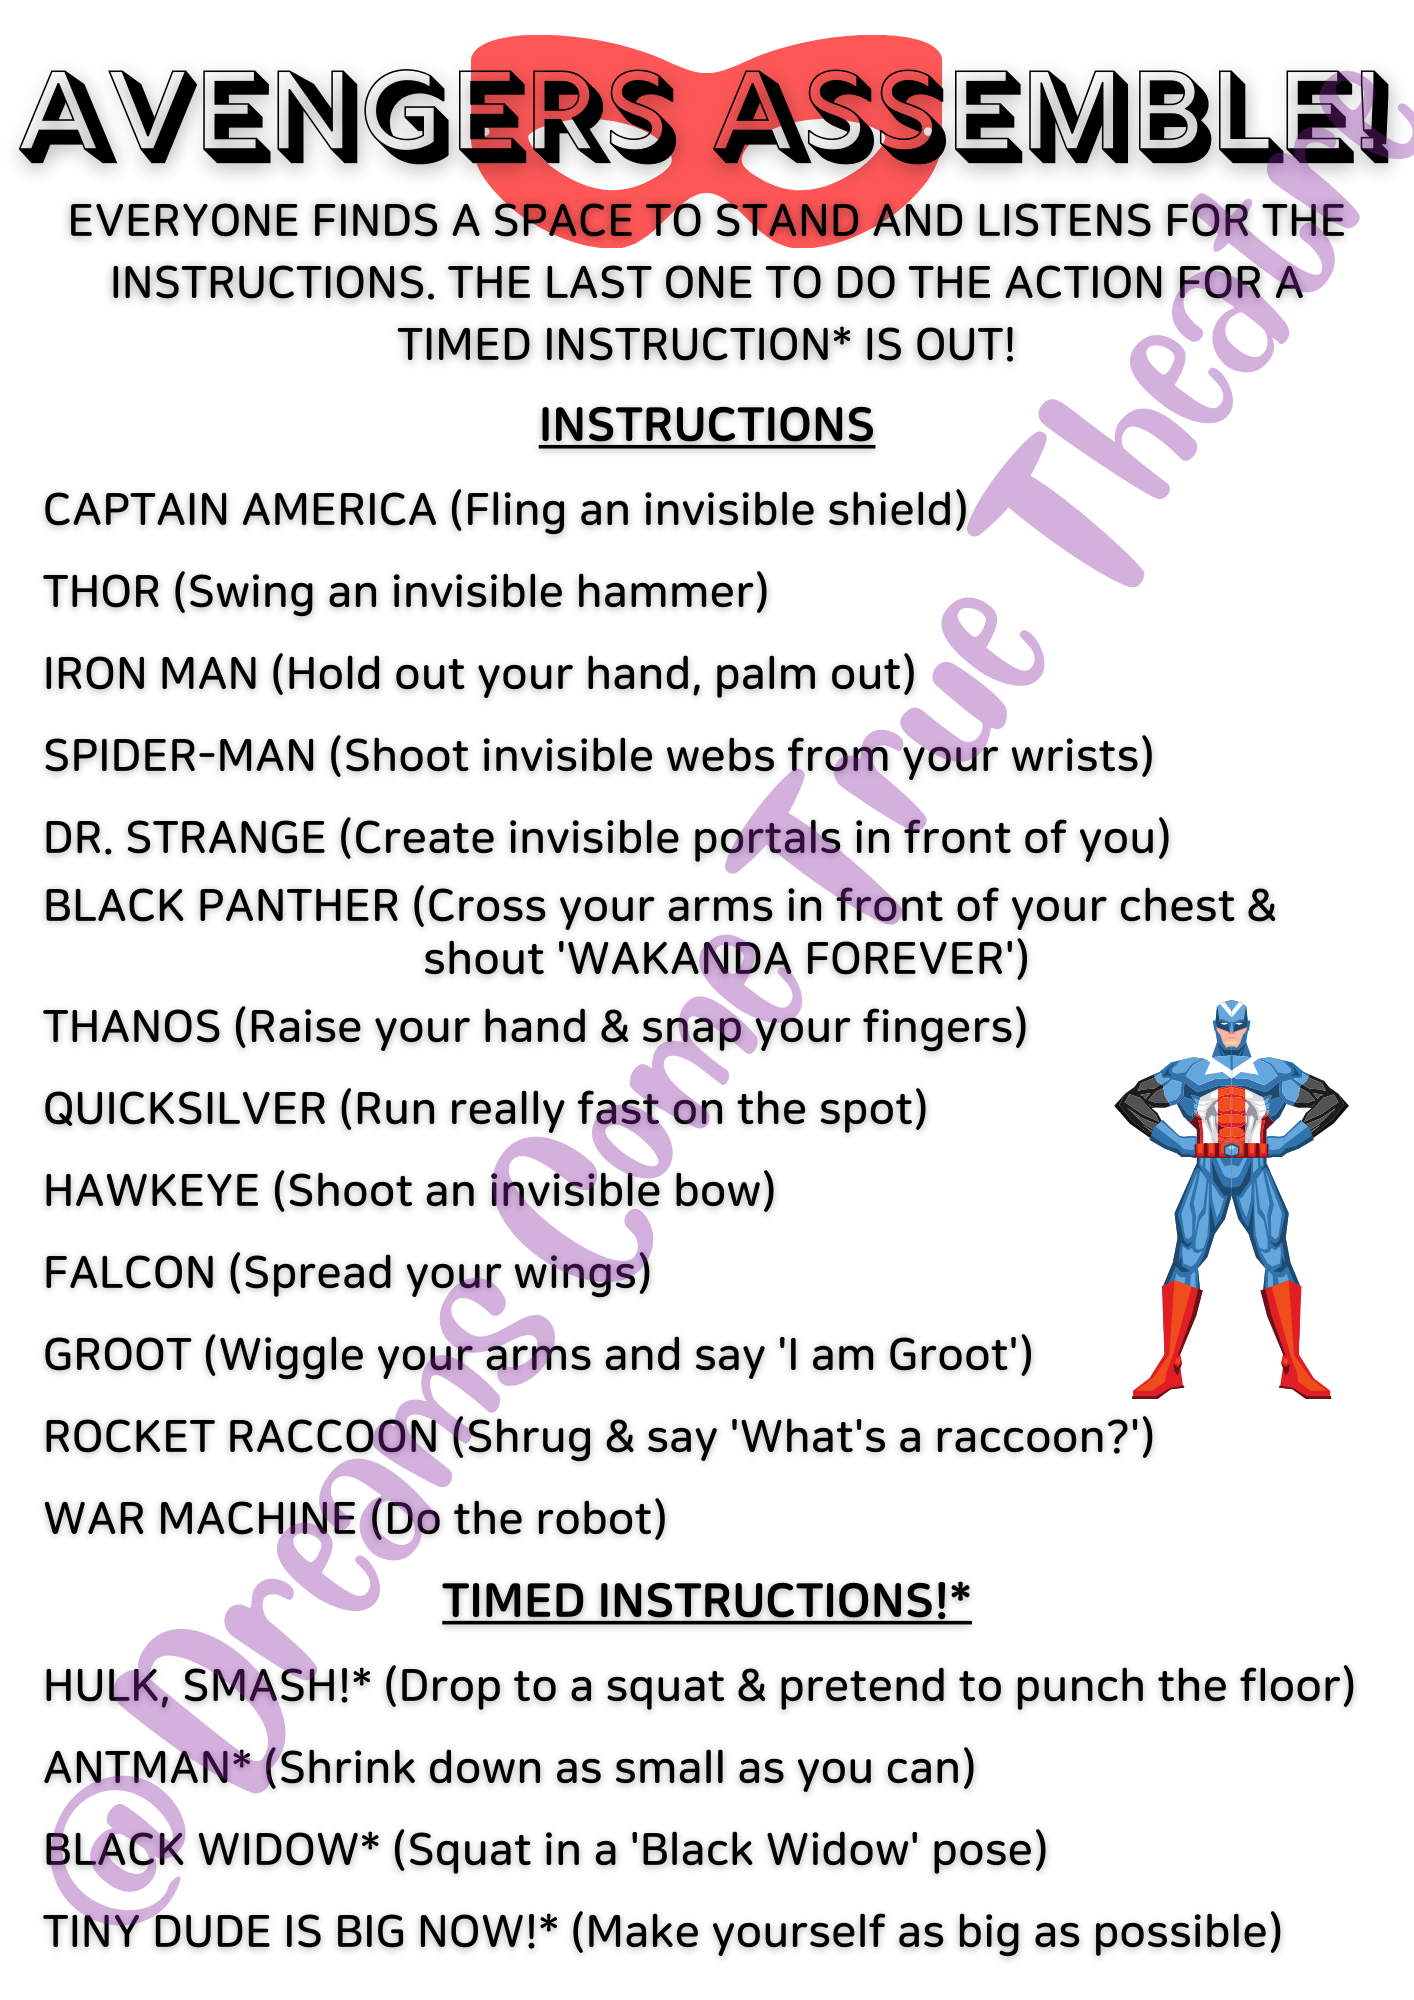 Avengers-themed party game instructions with actions.